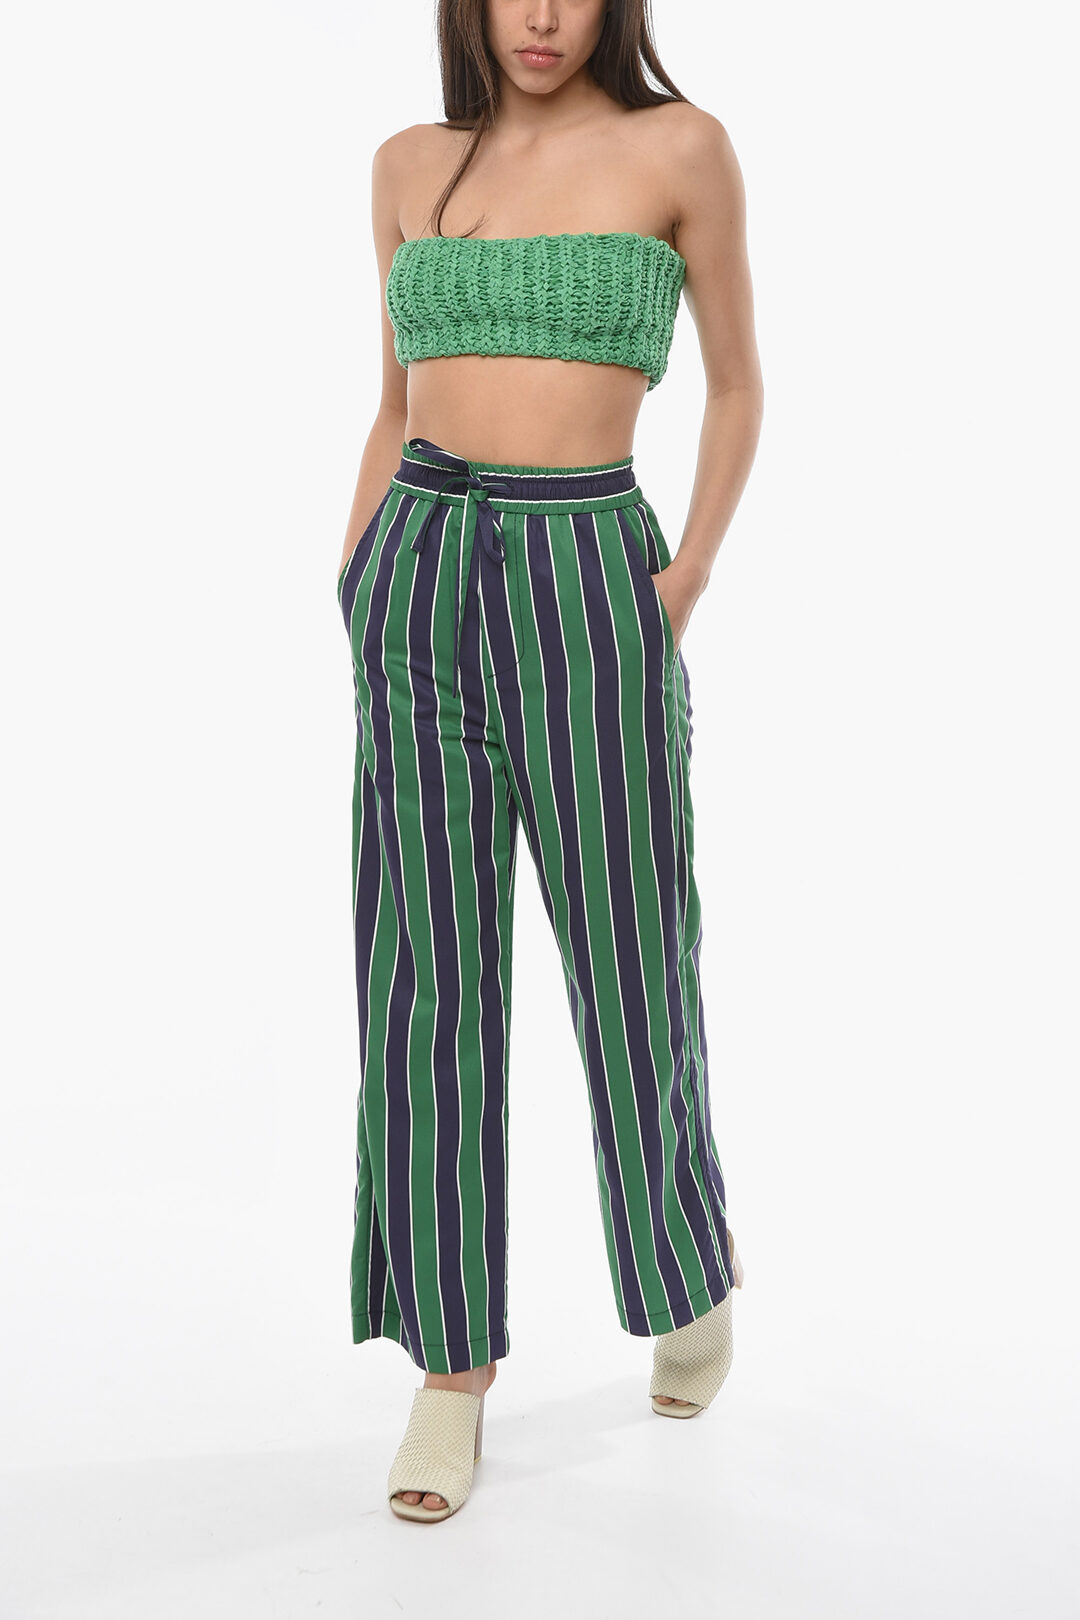 Sexy Ladies Striped Wide Leg Pants (No Stretch) - The Little Connection